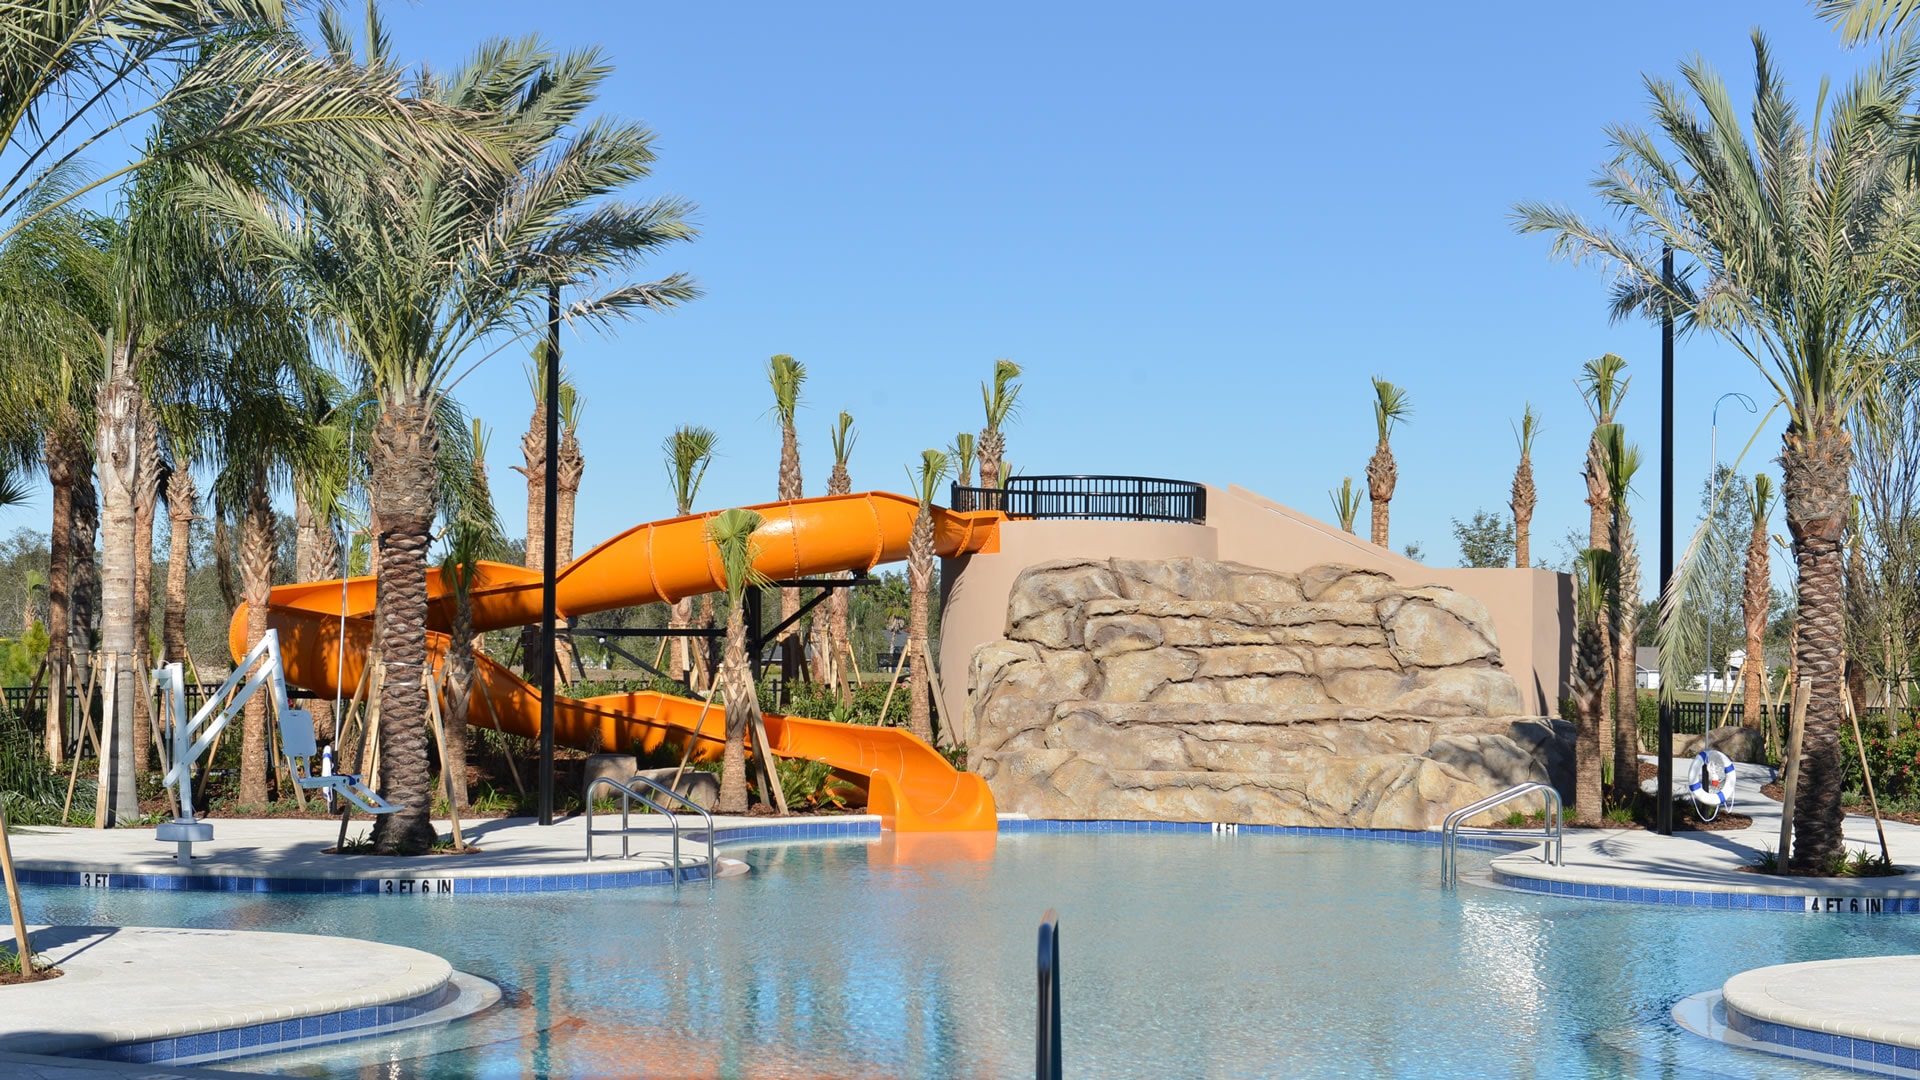 Your kids will love the water slide at Solterra Resort